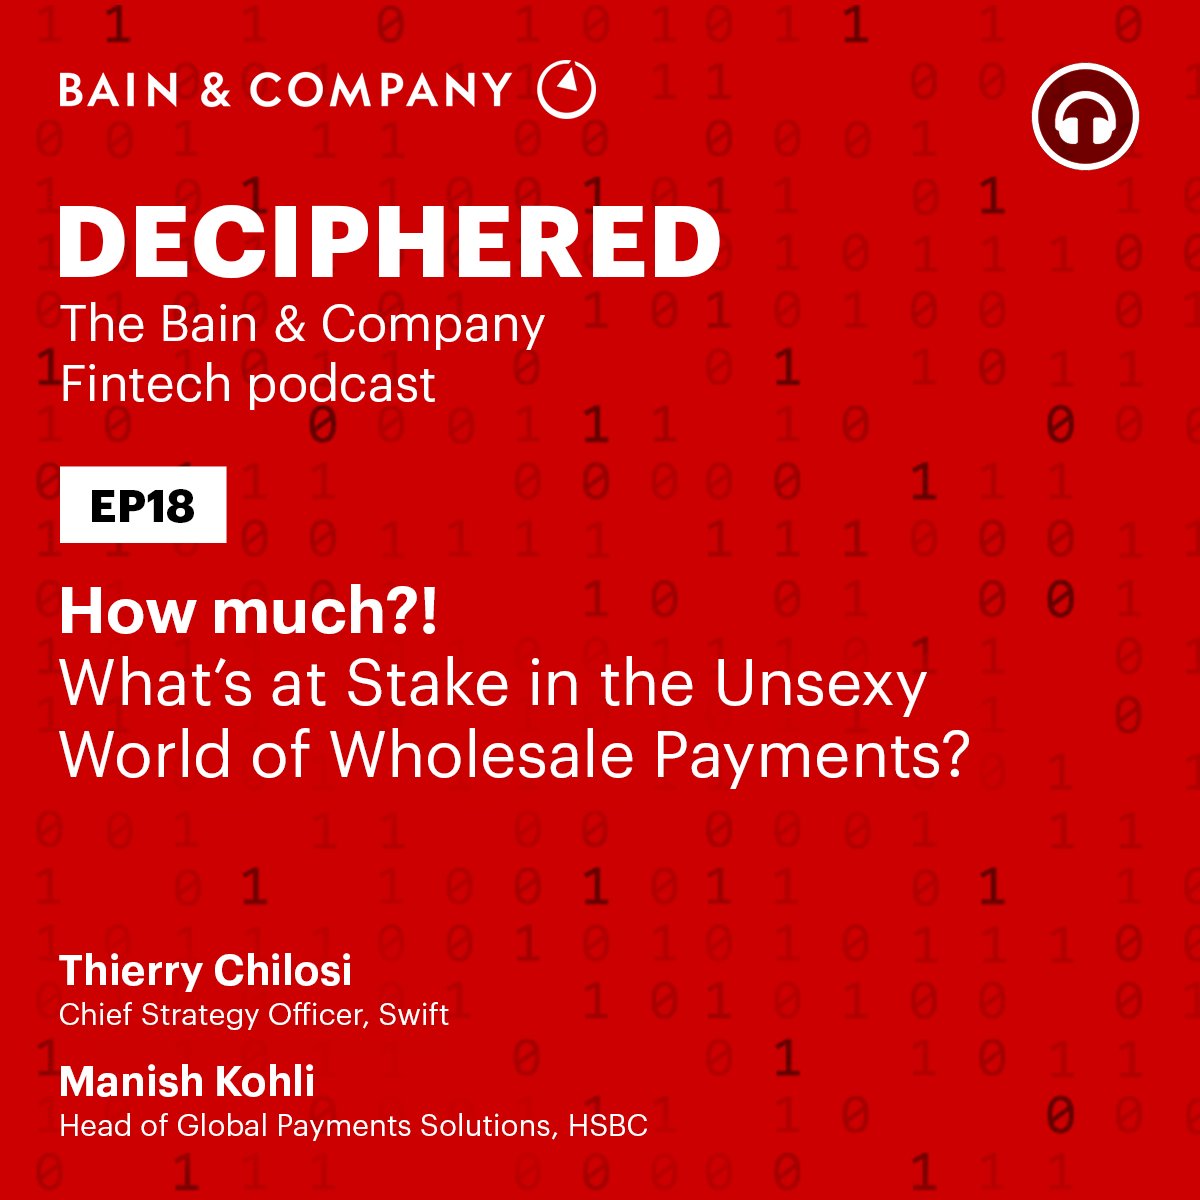 Tune into Deciphered: The #Fintech Podcast, where Adam Davis is joined by guests to discuss wholesale payments, with Erin McCune, Thierry Chilosi, chief strategy officer at @swiftcommunity; and Manish Kohli, head of global payments solutions at @HSBC. atbain.co/4aqn57a